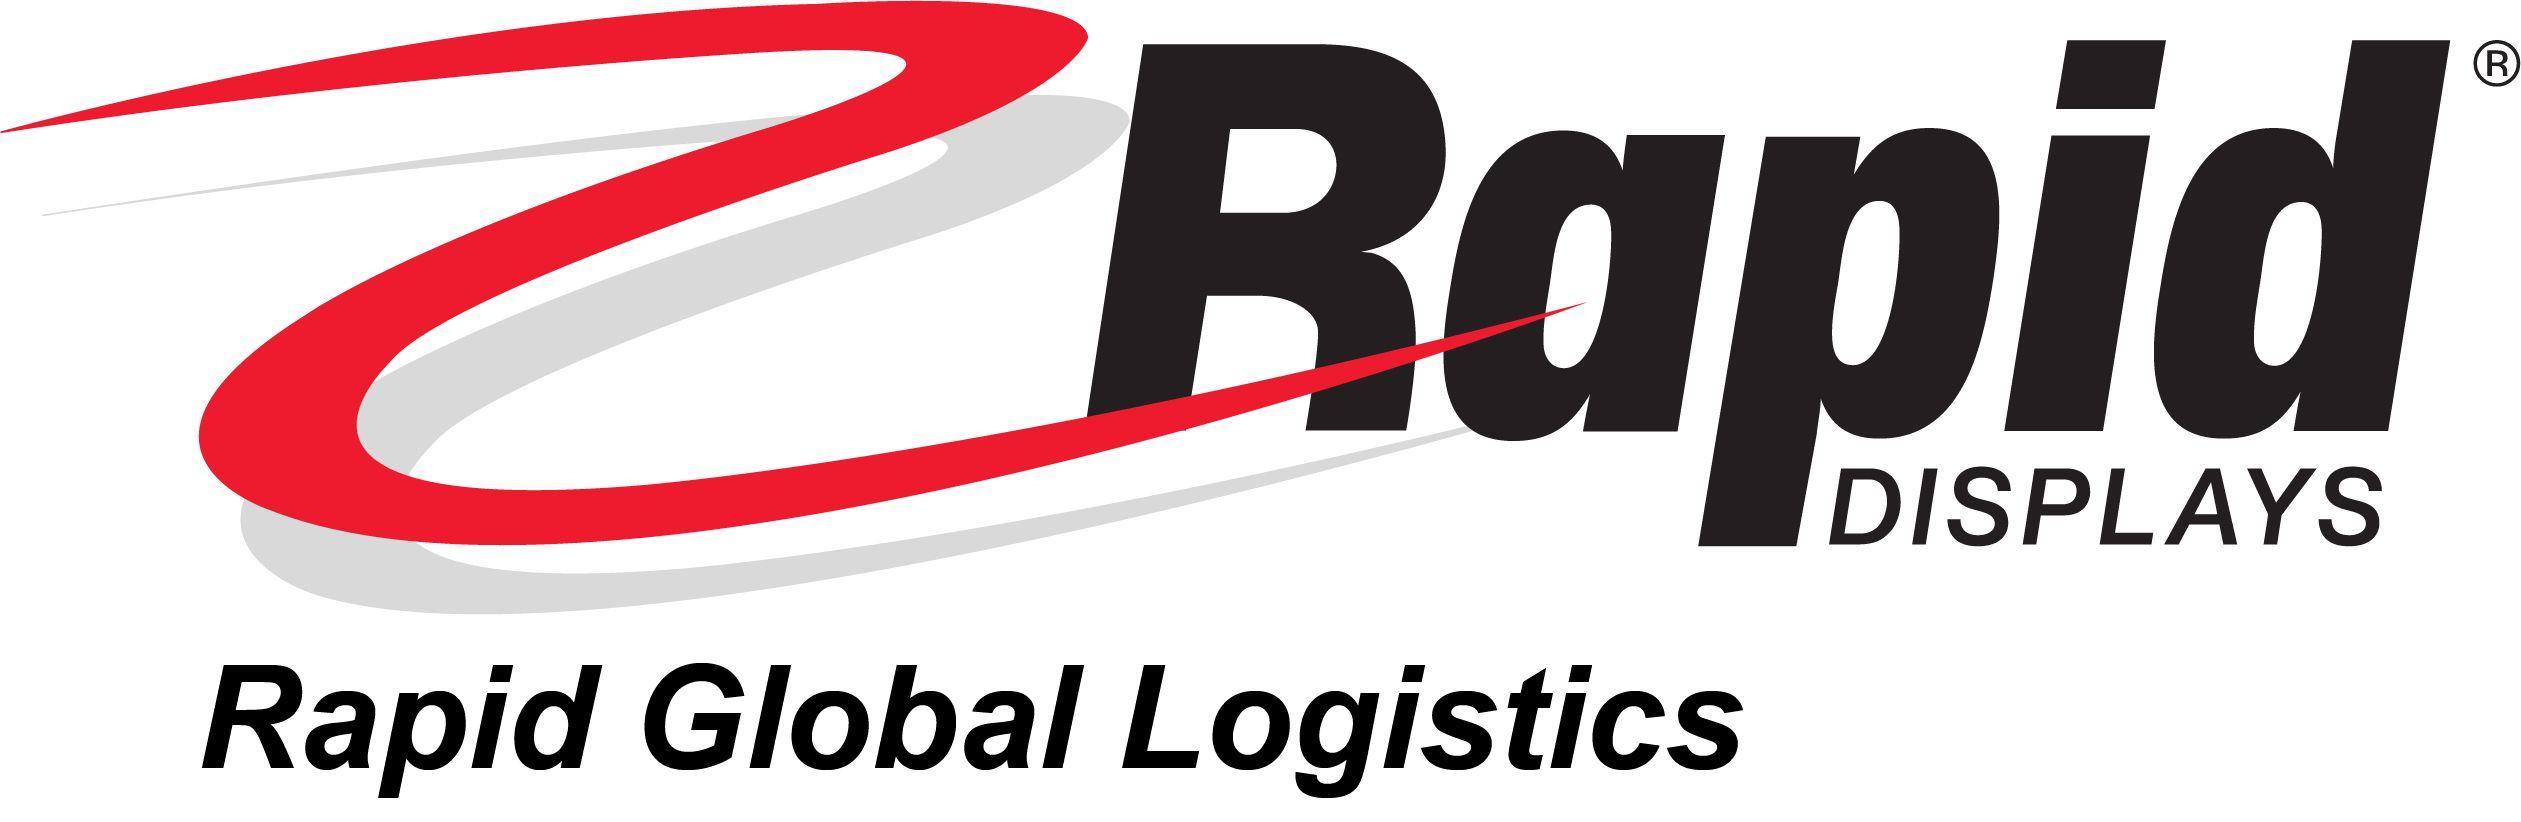 Global Rapid Logo - Rapid Displays - Pick and Pack Fulfillment & Category Management ...